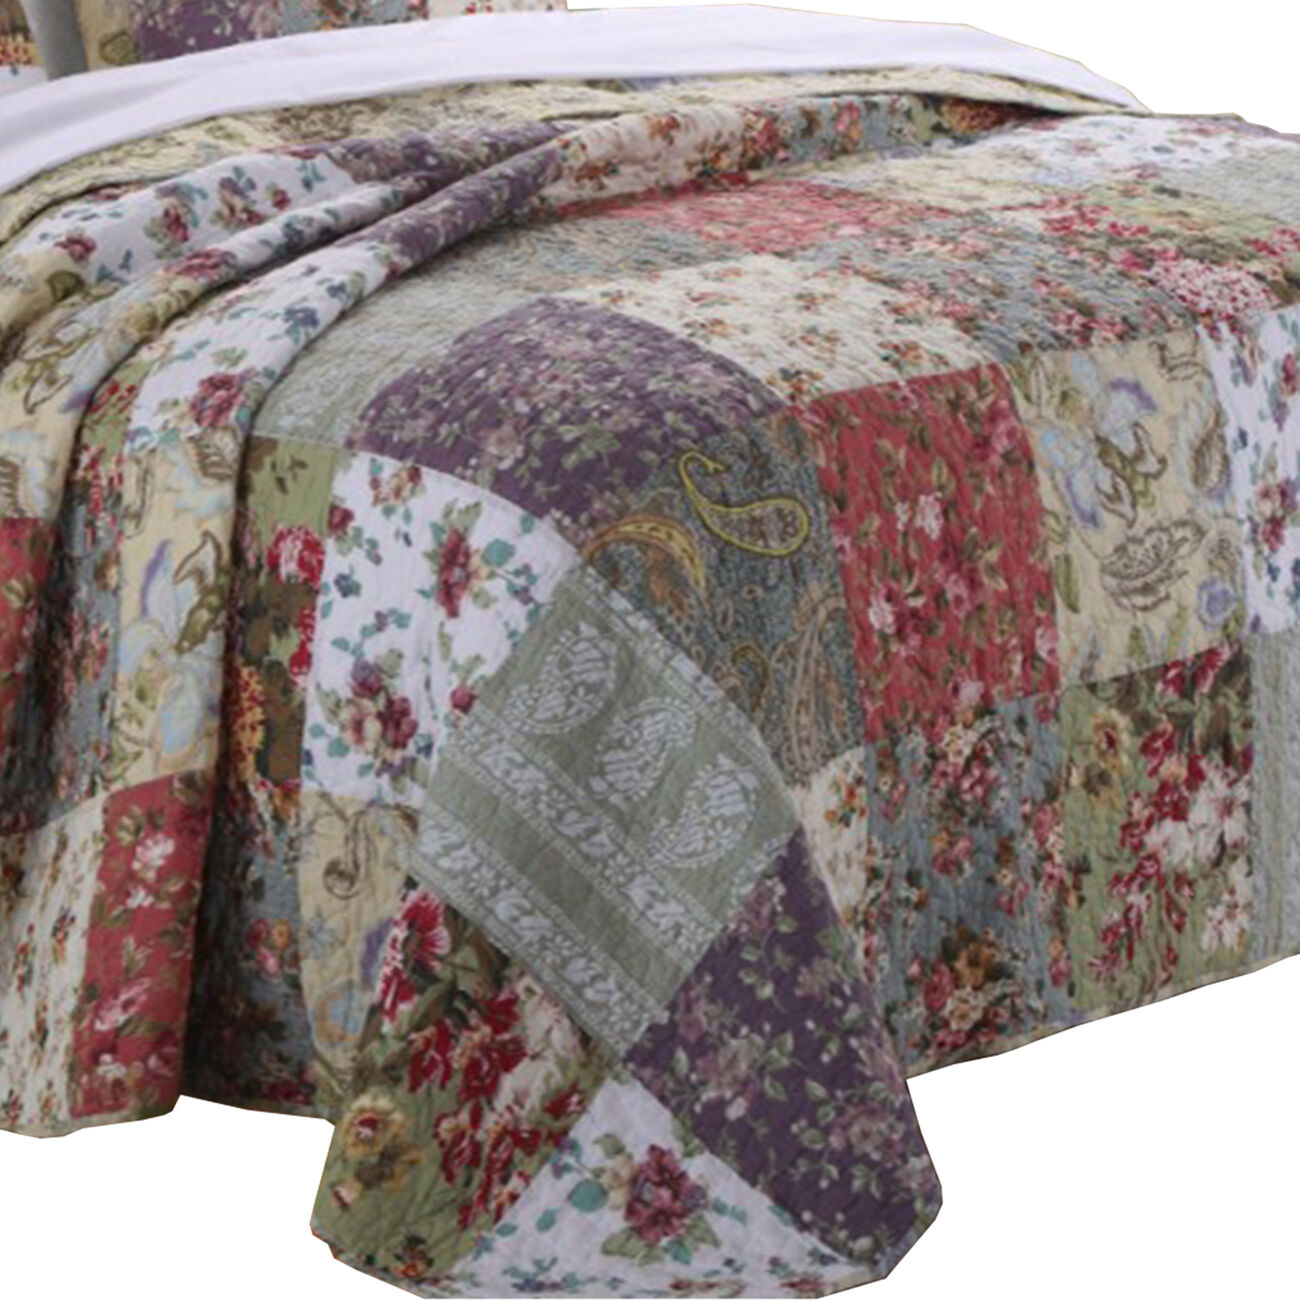 Chicago 2 Piece Fabric Twin Bedspread Set with Jacobean Prints, Multicolor